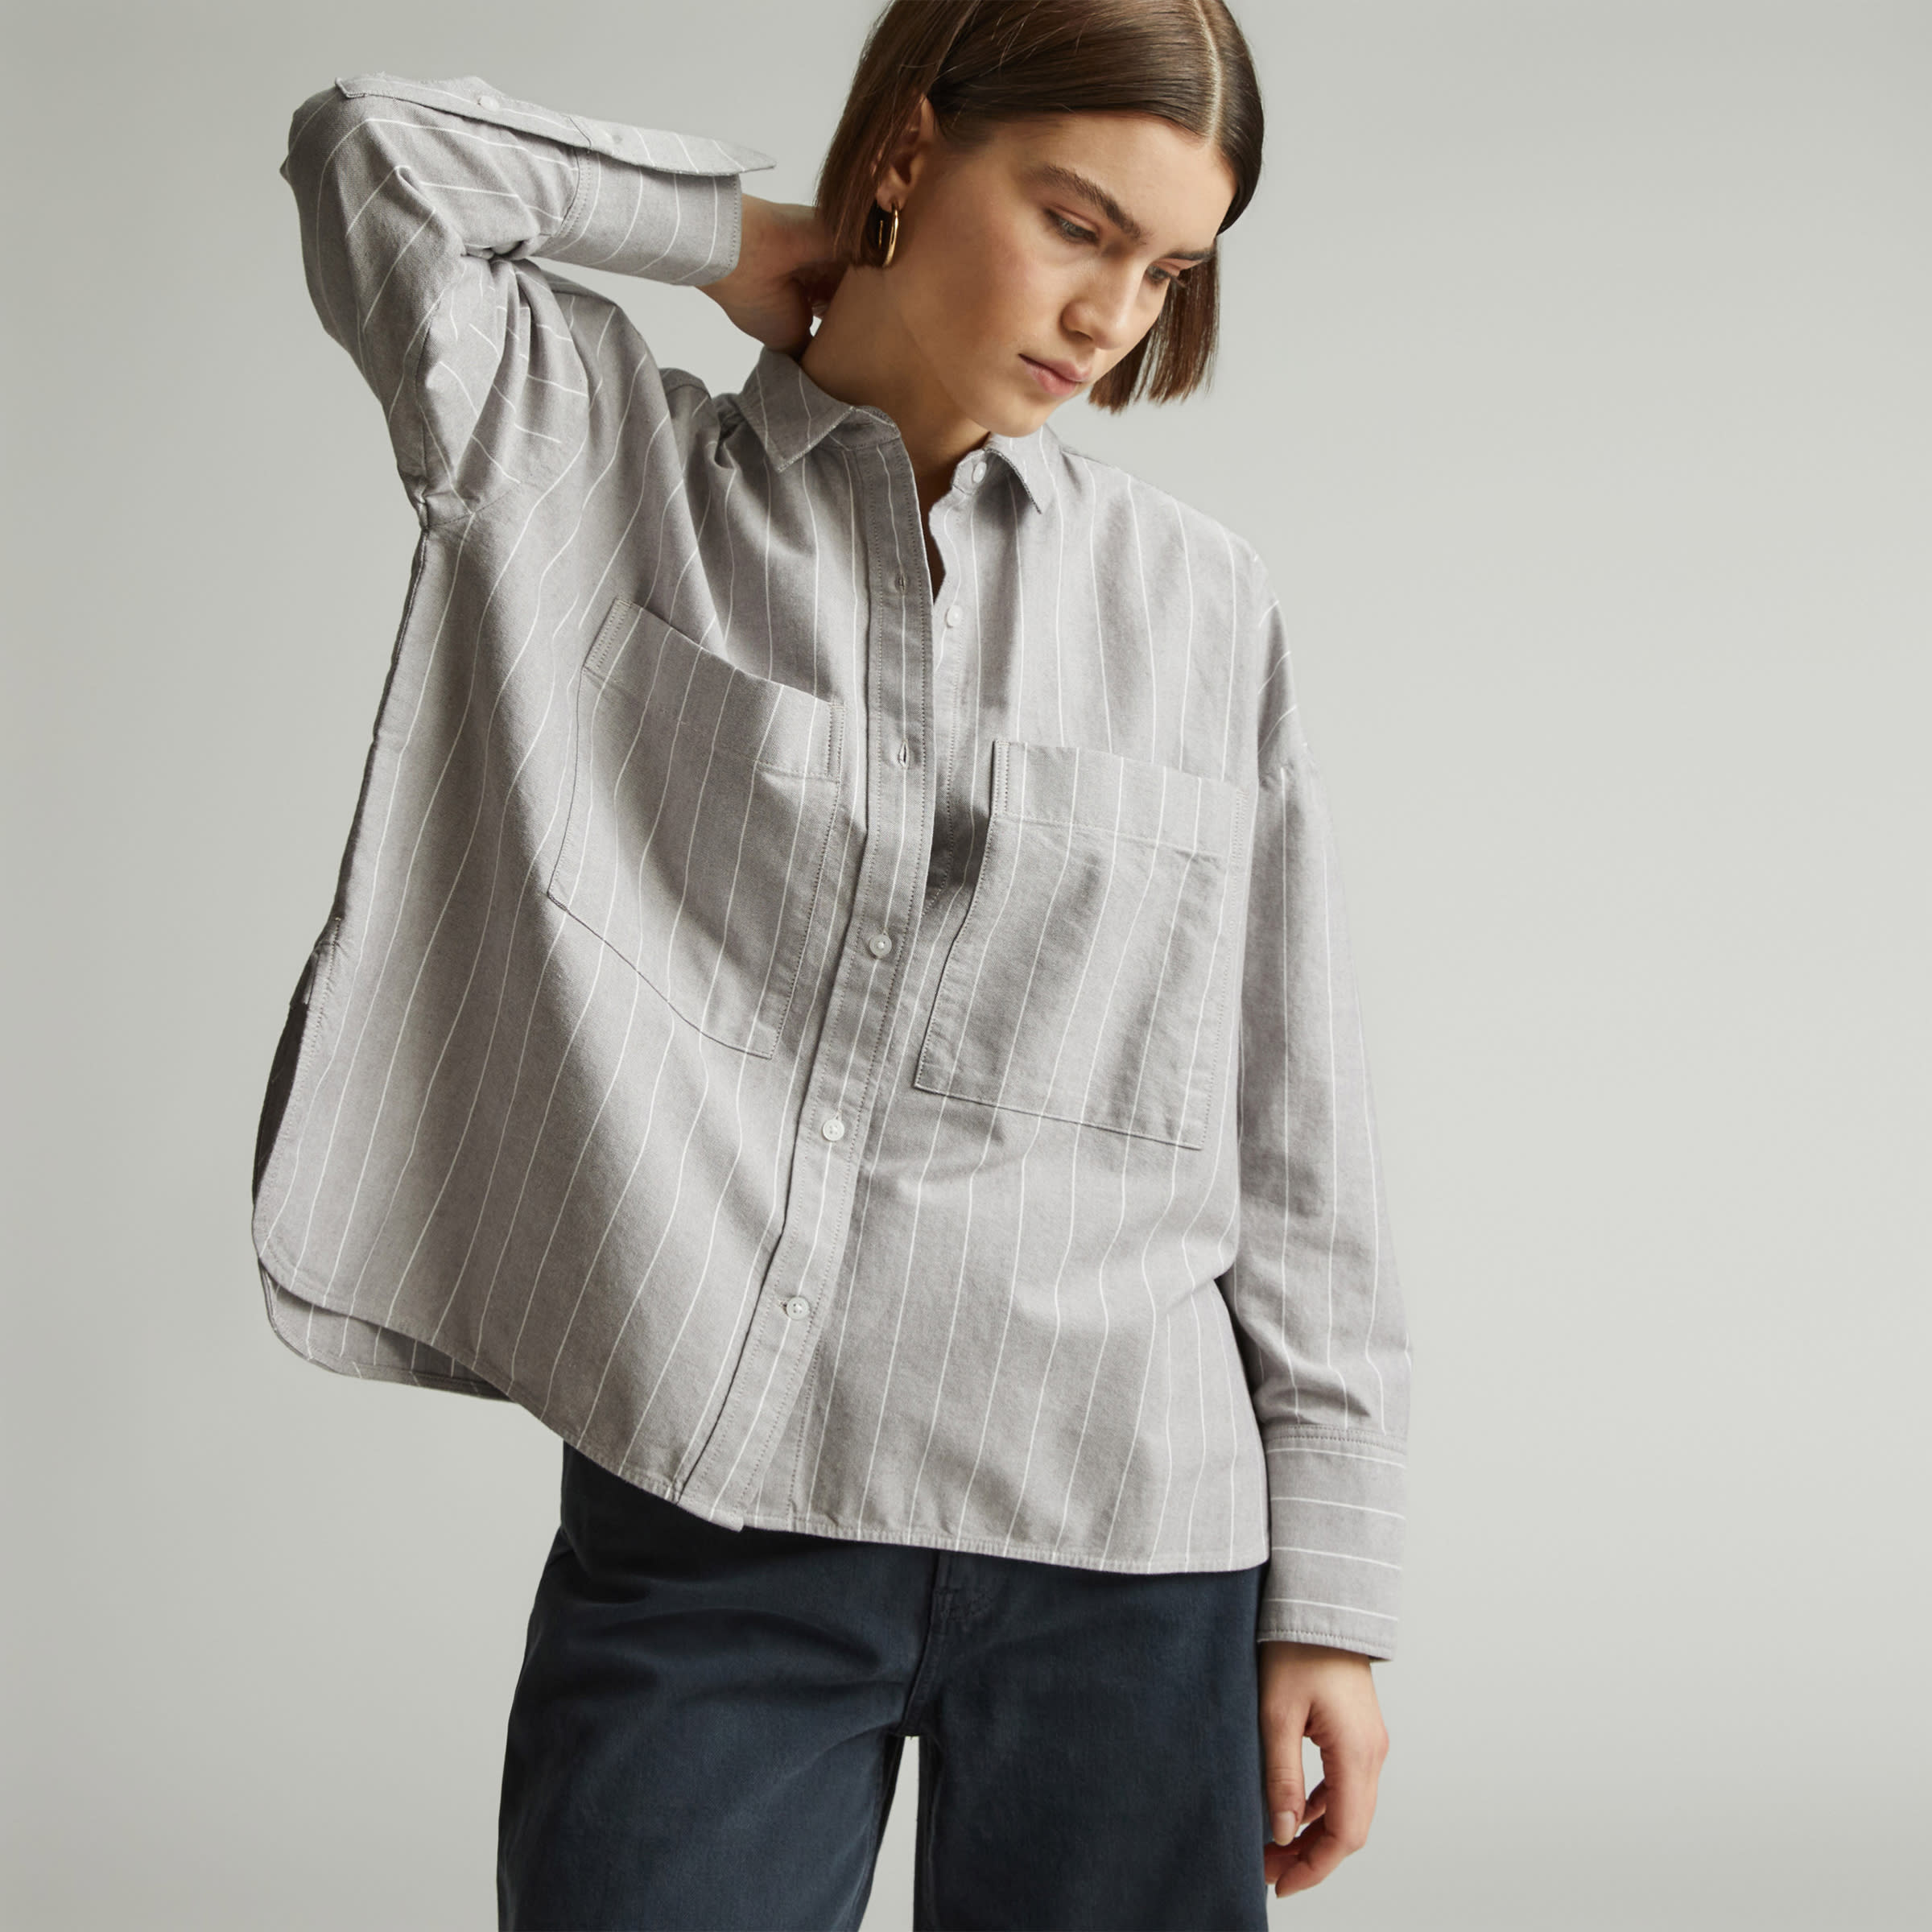 Your favorite button-up just got a refresh. The Boxy Oxford pairs